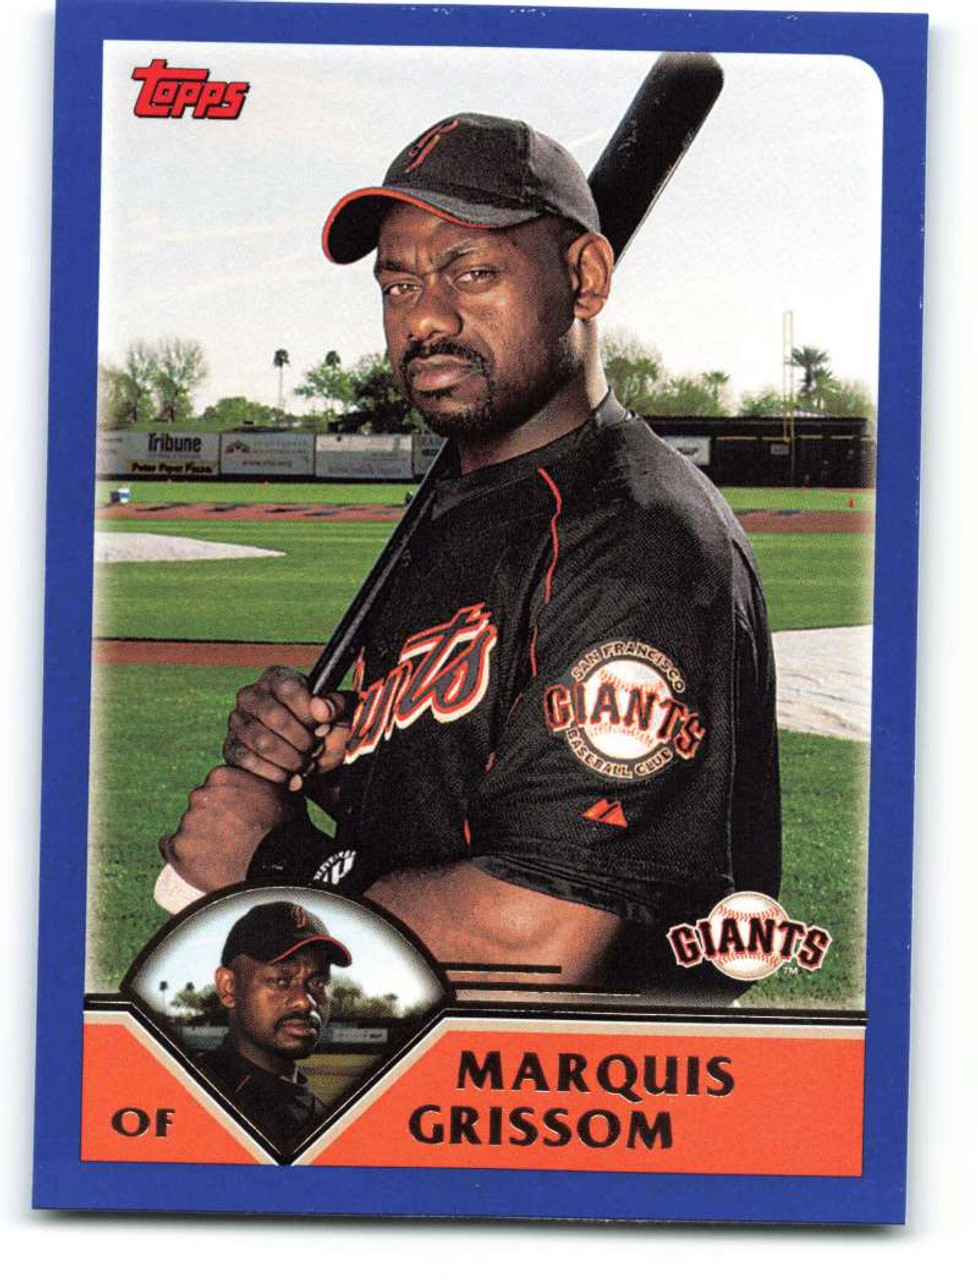 2003 Topps #526 Marquis Grissom VG San Francisco Giants - Under